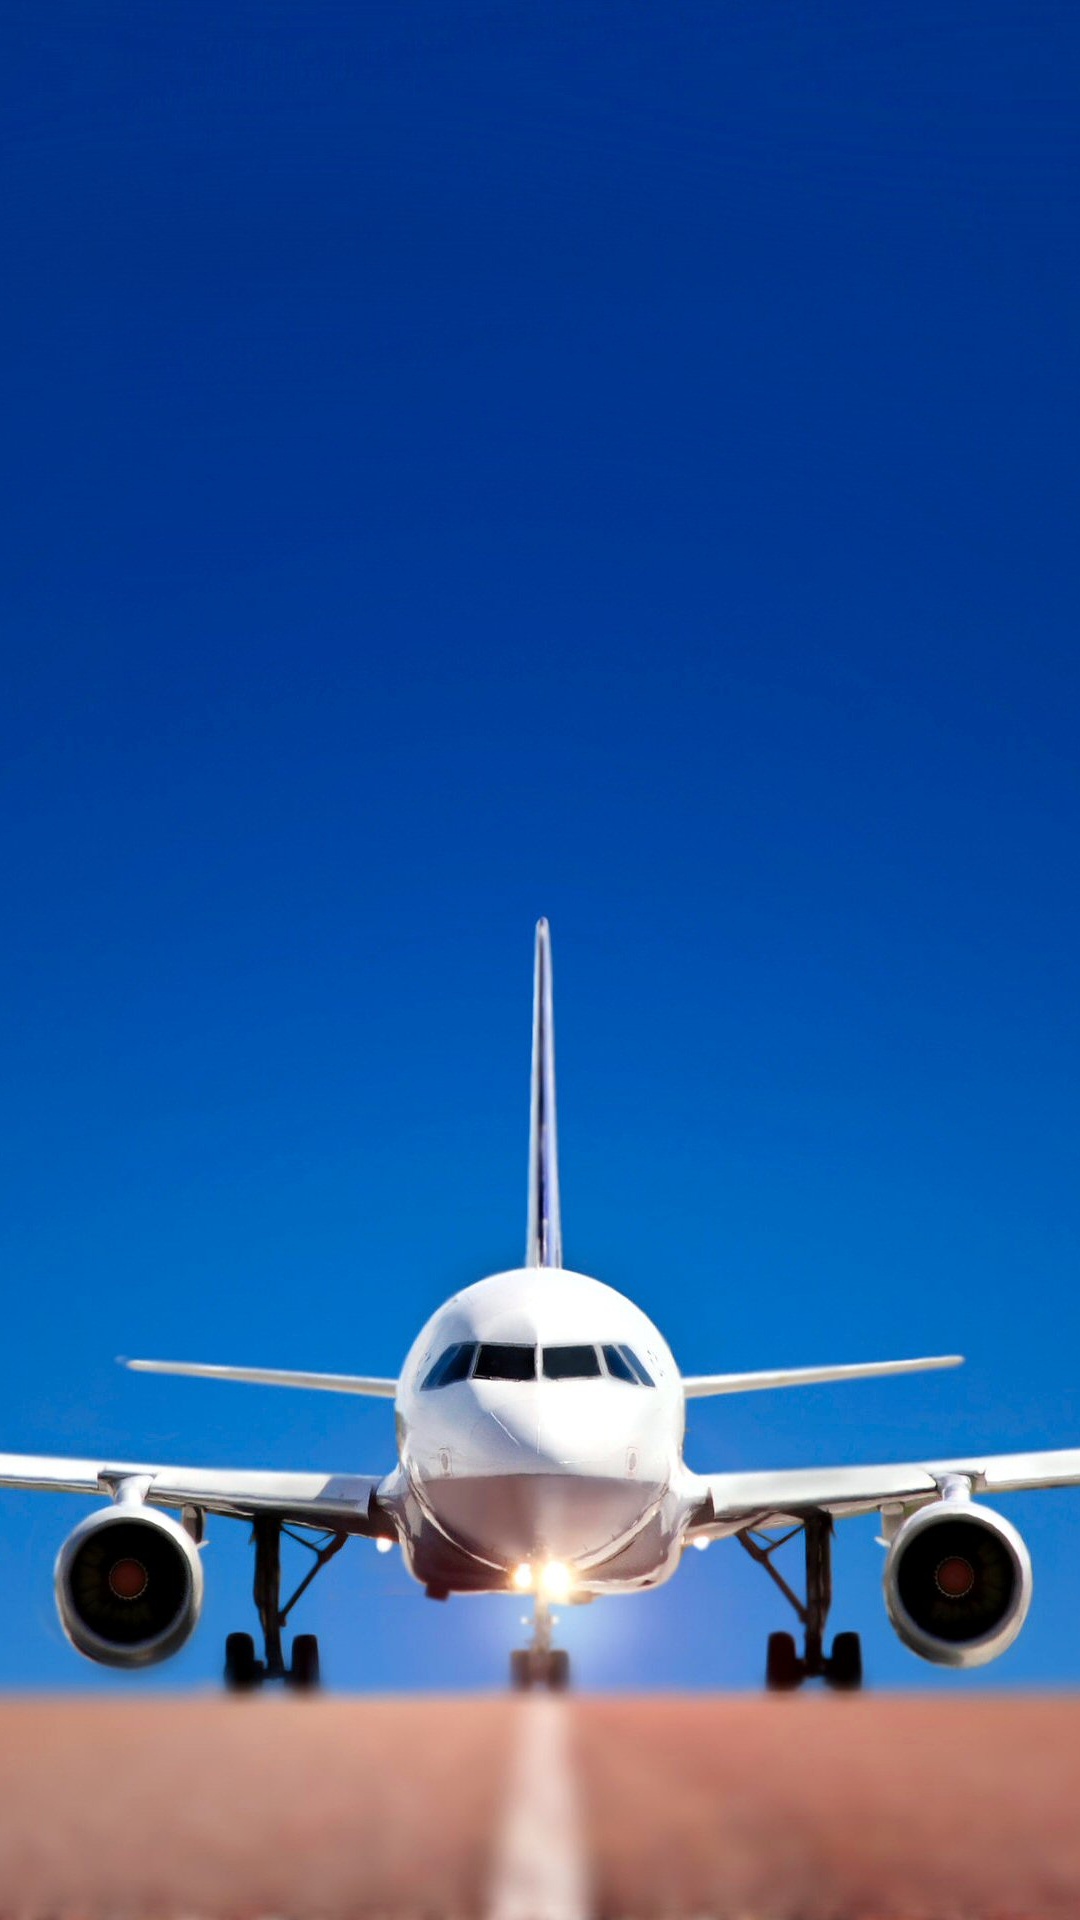 White Airplane in Mid Air During Daytime. Wallpaper in 1080x1920 Resolution